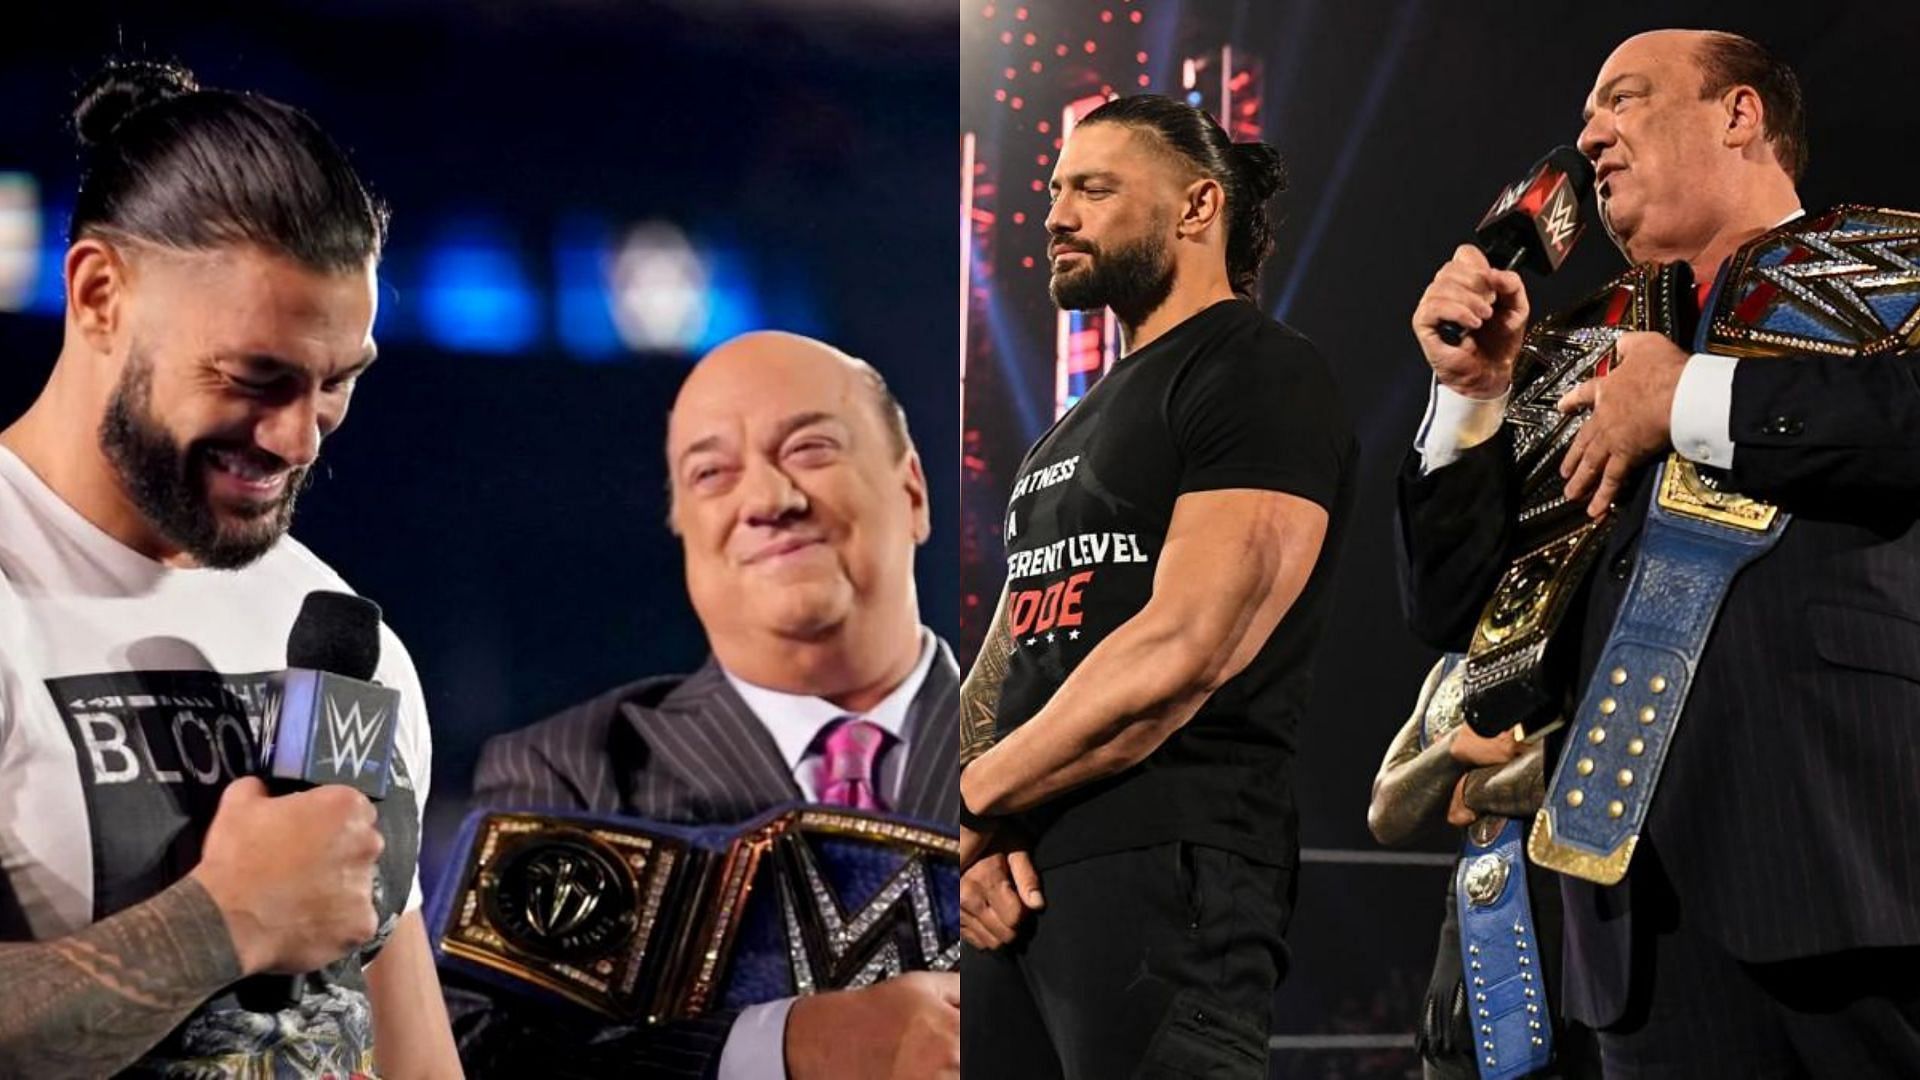 Paul Heyman and Roman Reigns were the foundation of The Bloodline faction